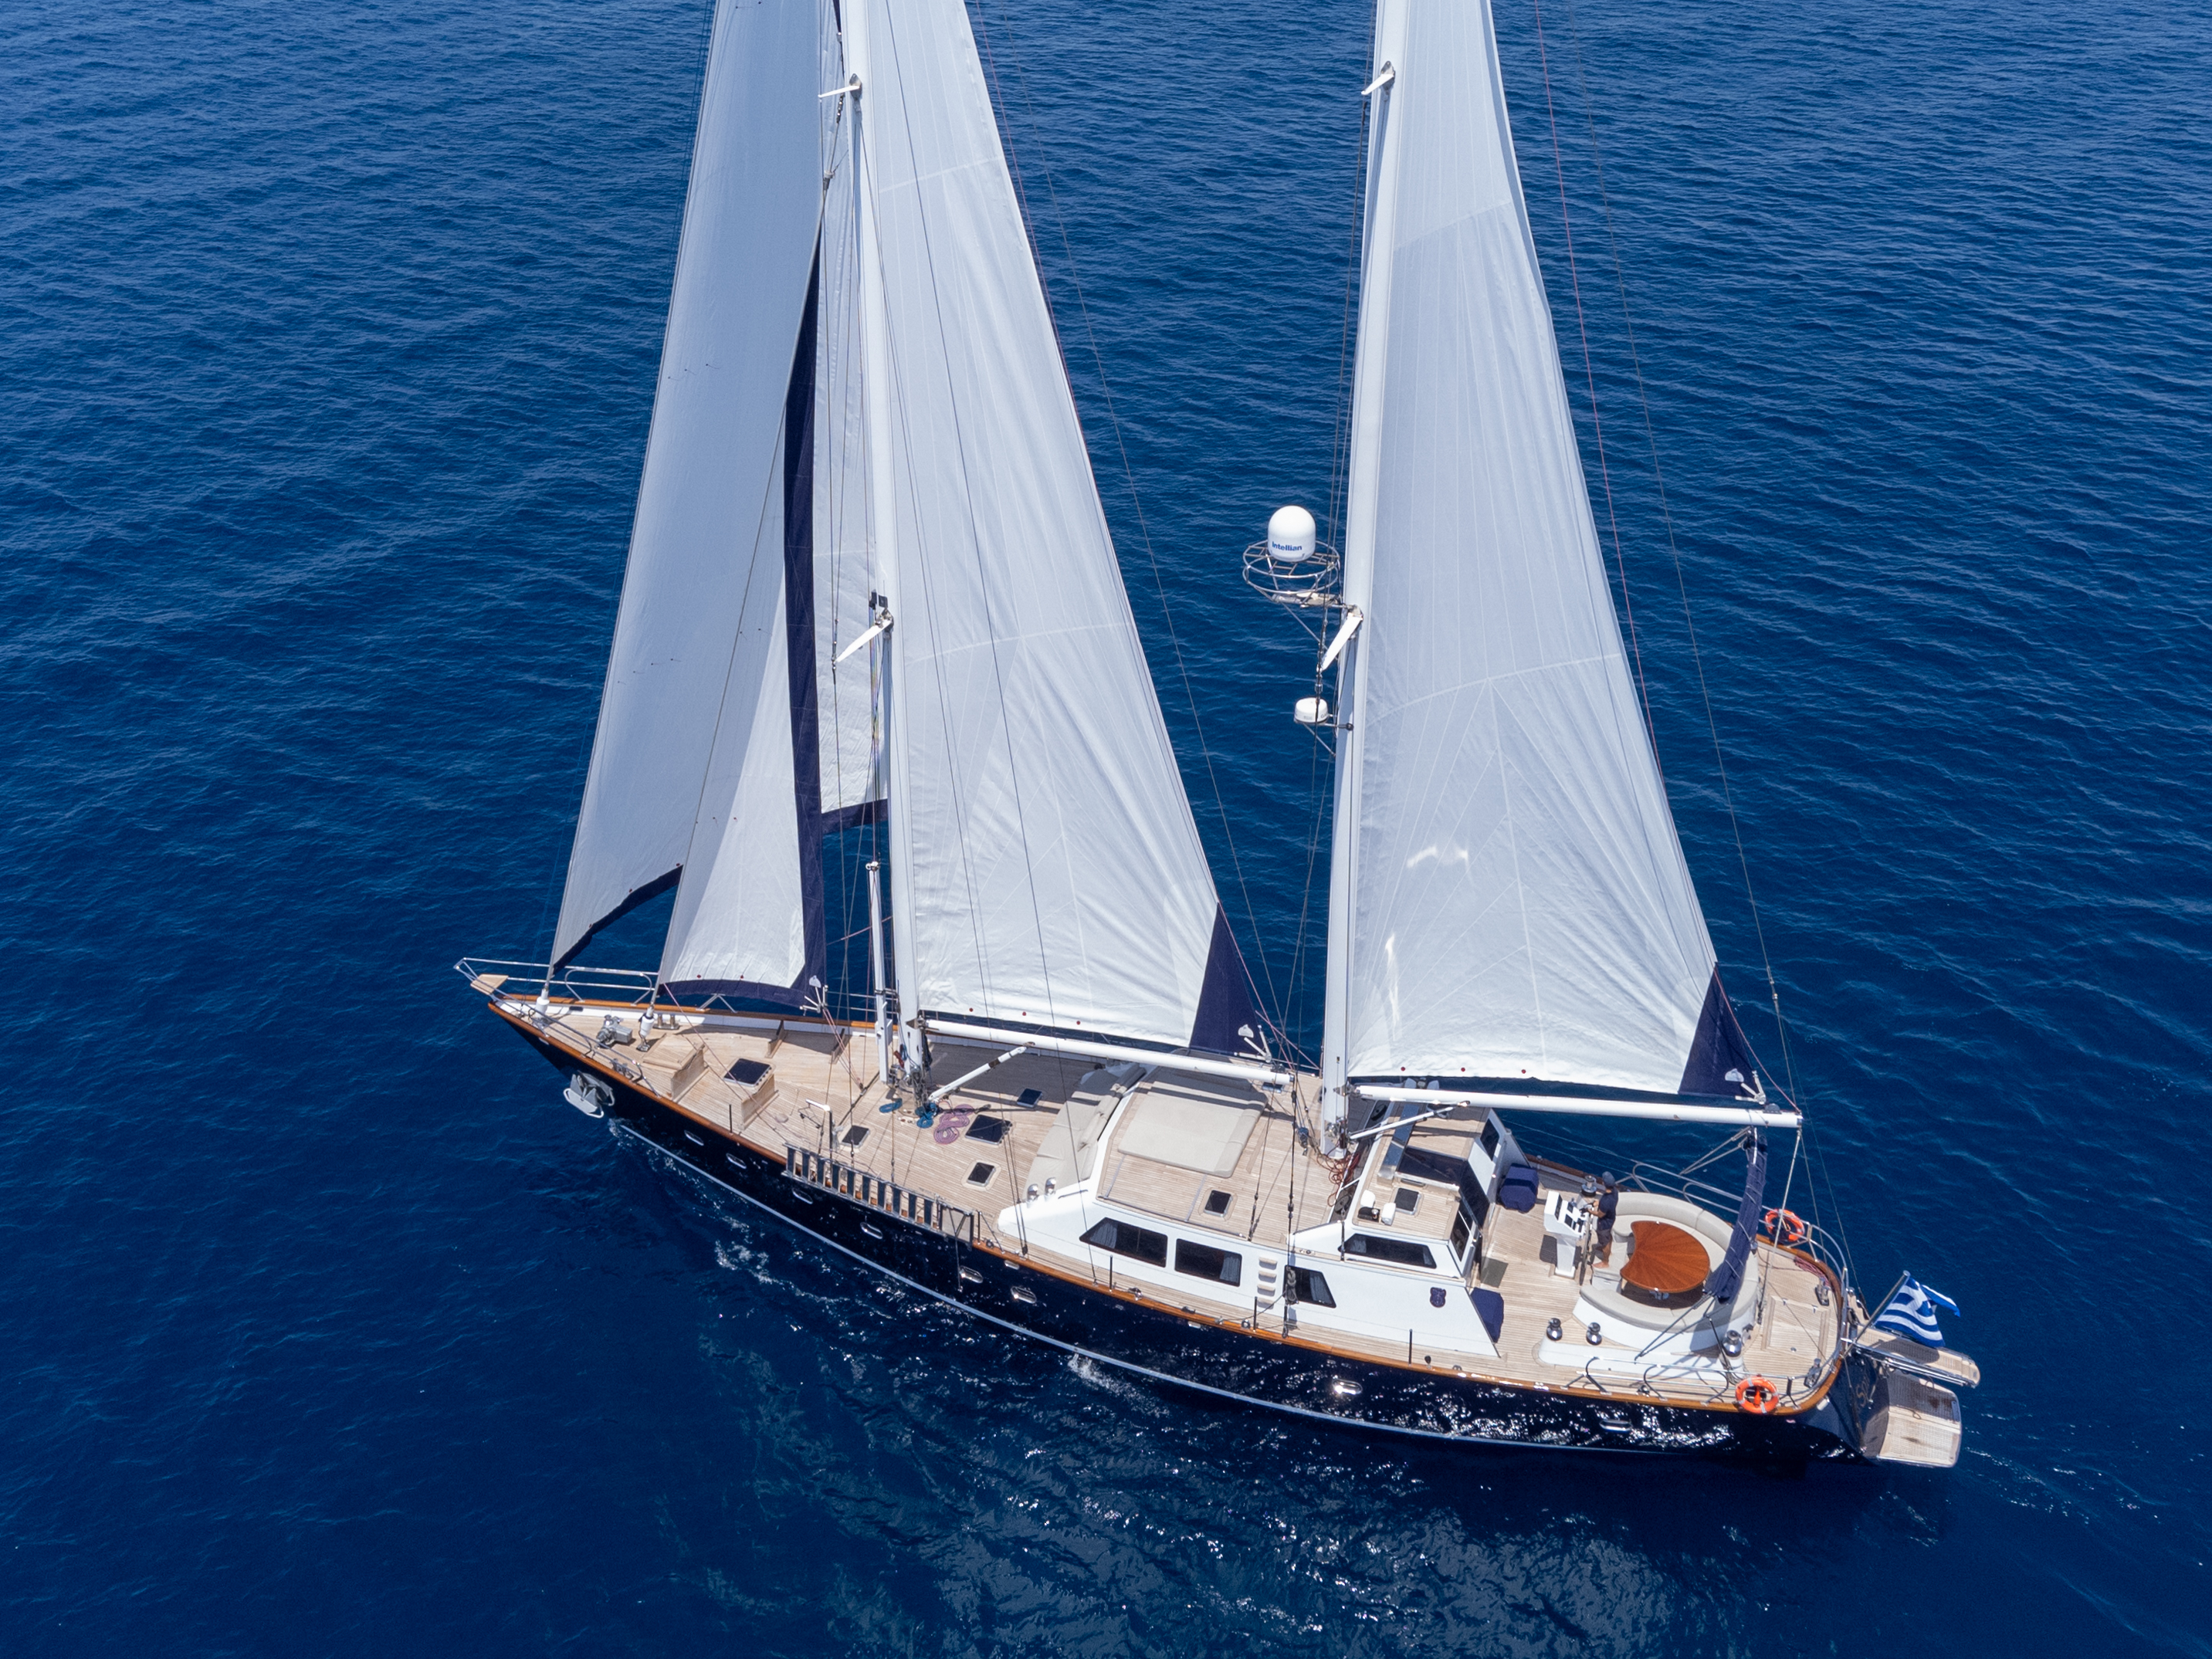 CCYD 85 - Superyacht charter Saint Lucia & Boat hire in Greece Athens and Saronic Gulf Athens Piraeus Marina Zea 6